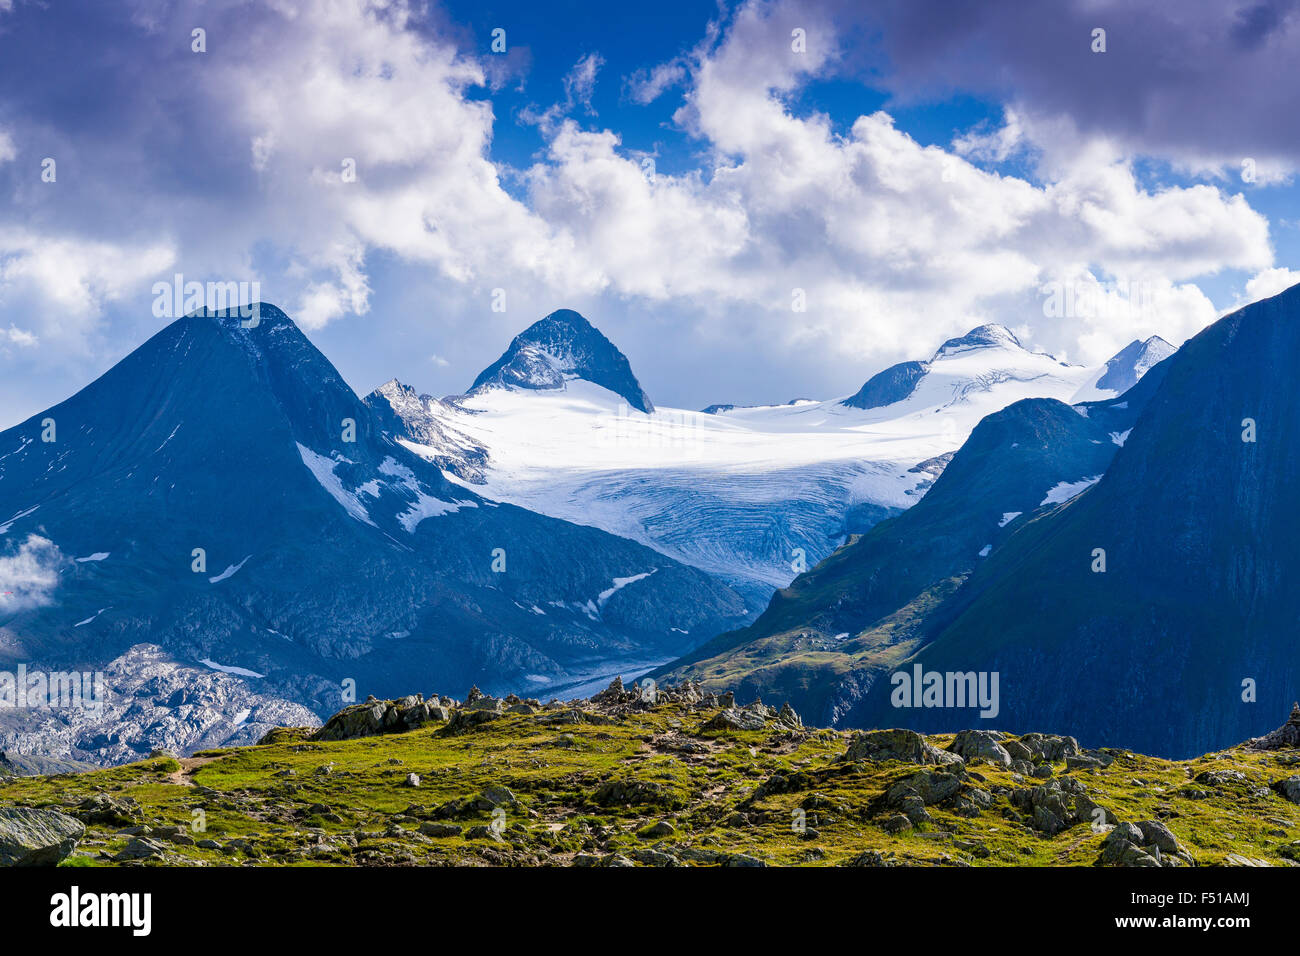 The mountains Bettelmatthorn and Rothorn with a big glacier are located near Nufenenpass, dark clouds at the sky Stock Photo